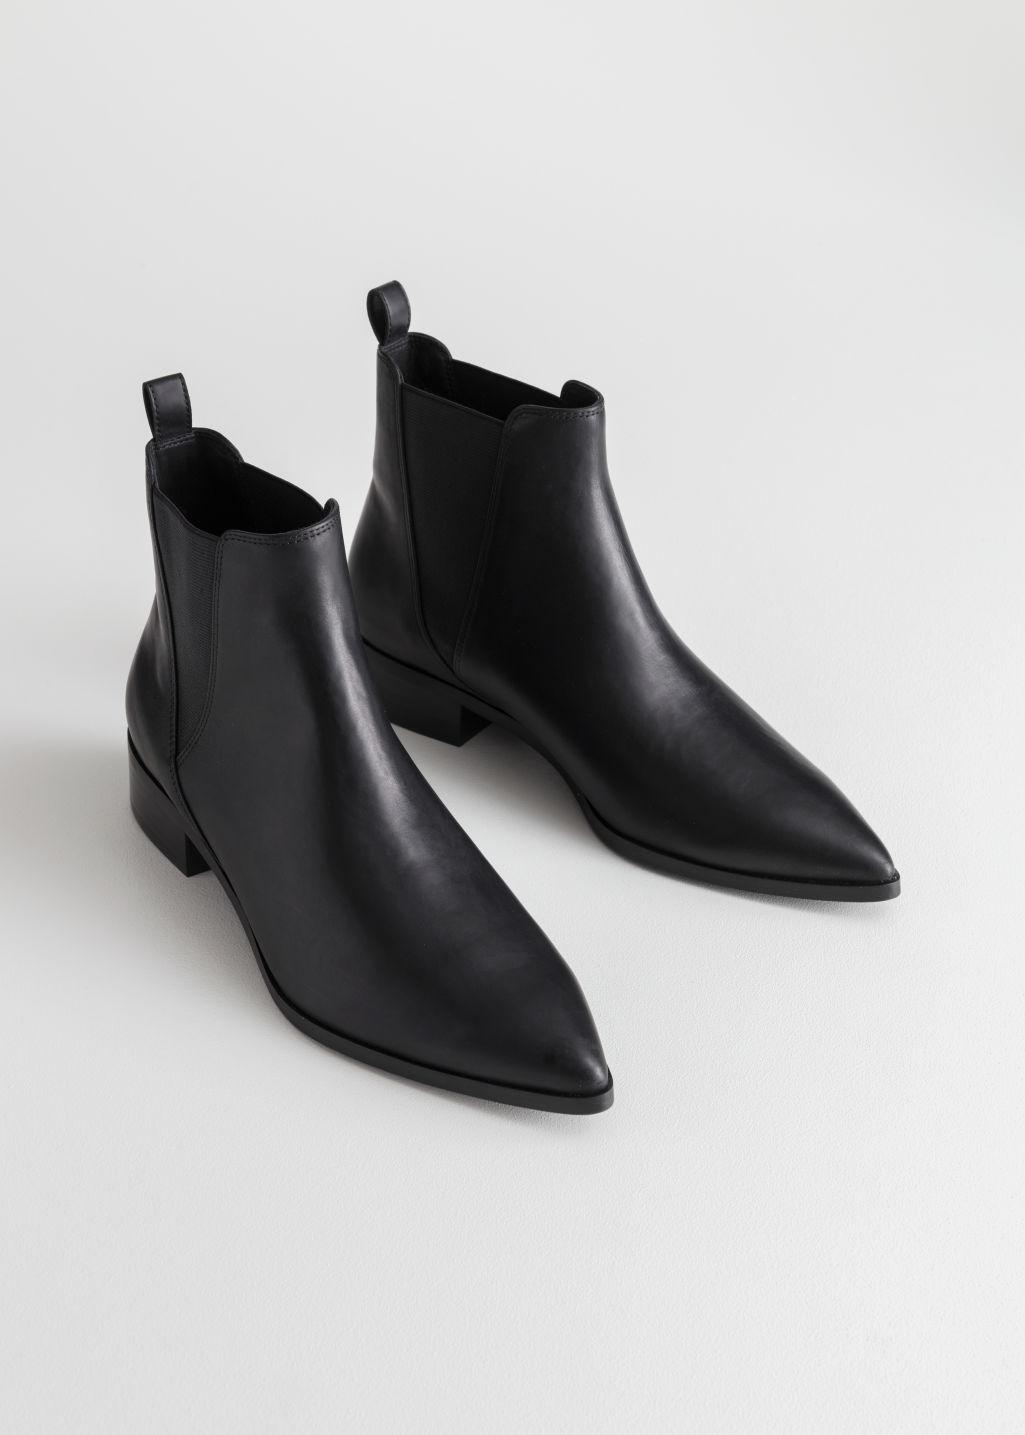 & Other Stories Chelsea Boots in Black | Lyst